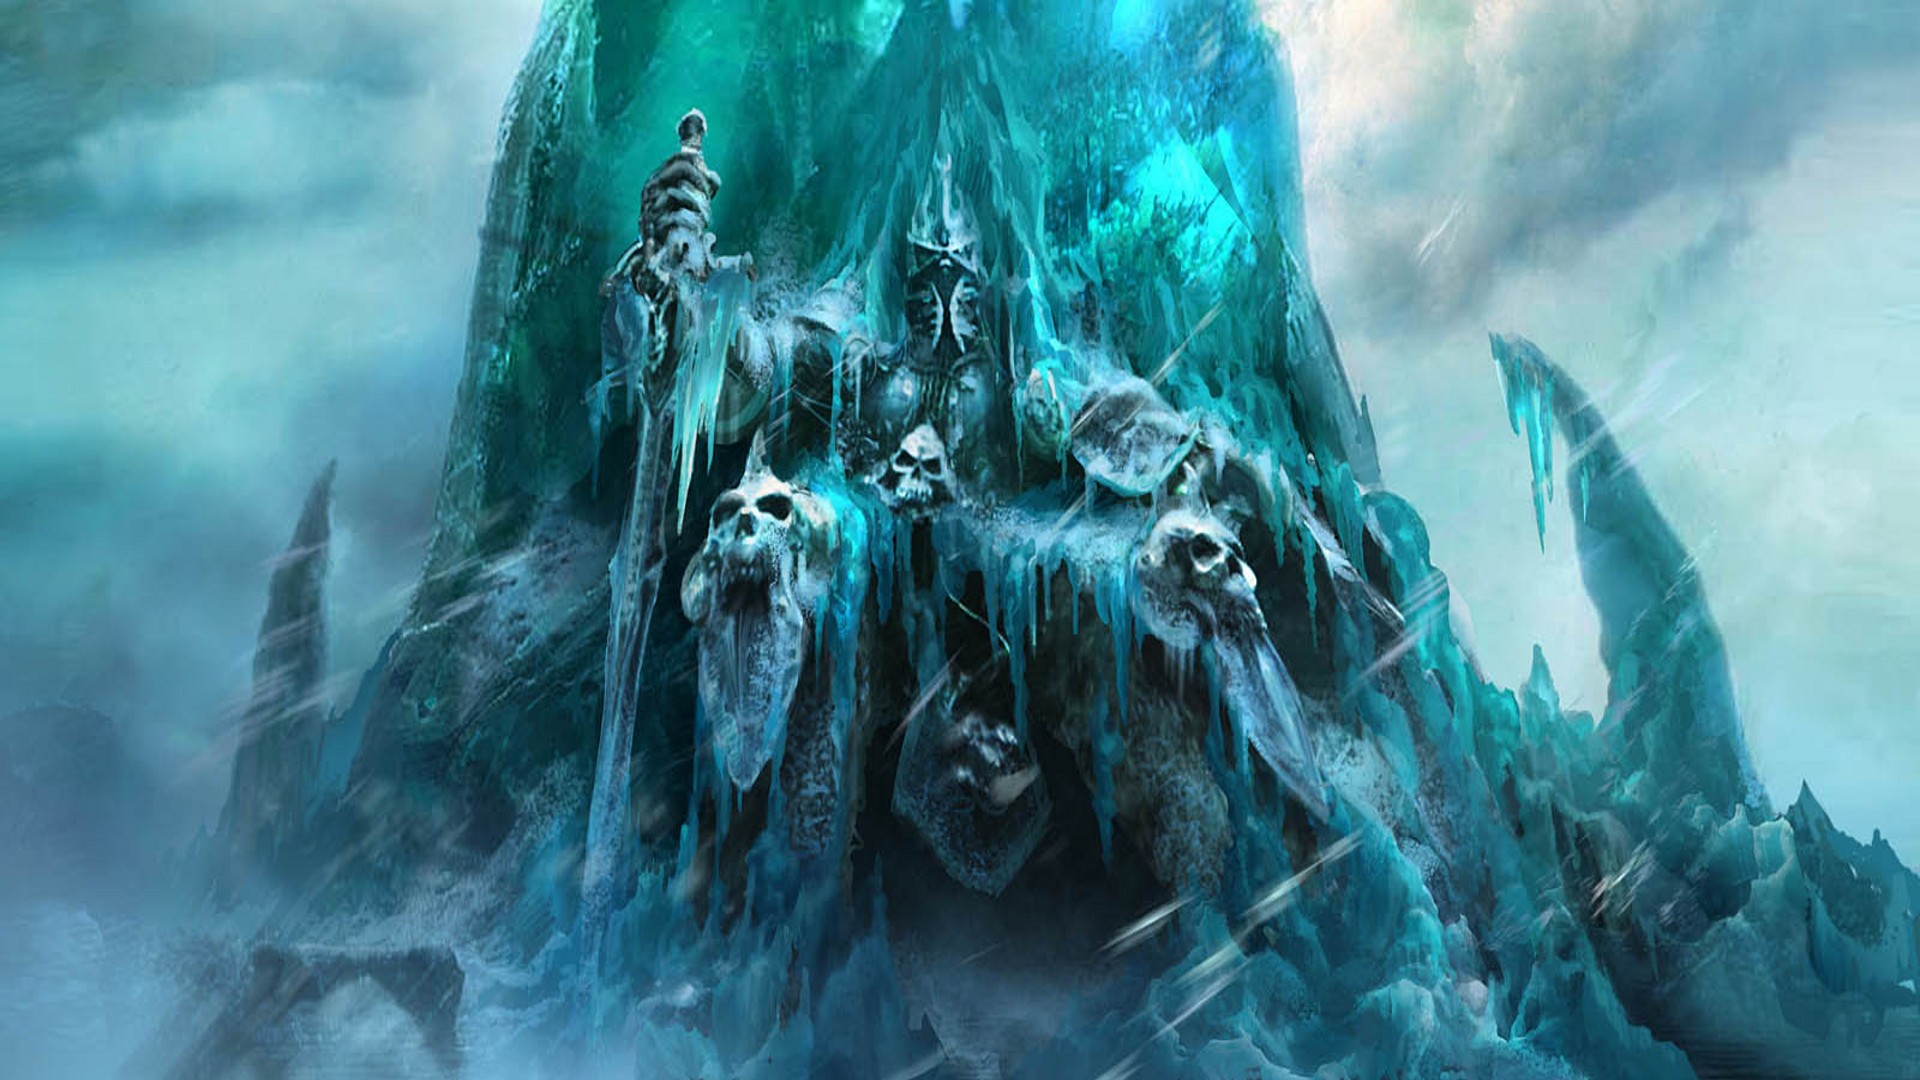 World of Warcraft Wrath of the Lich King review and